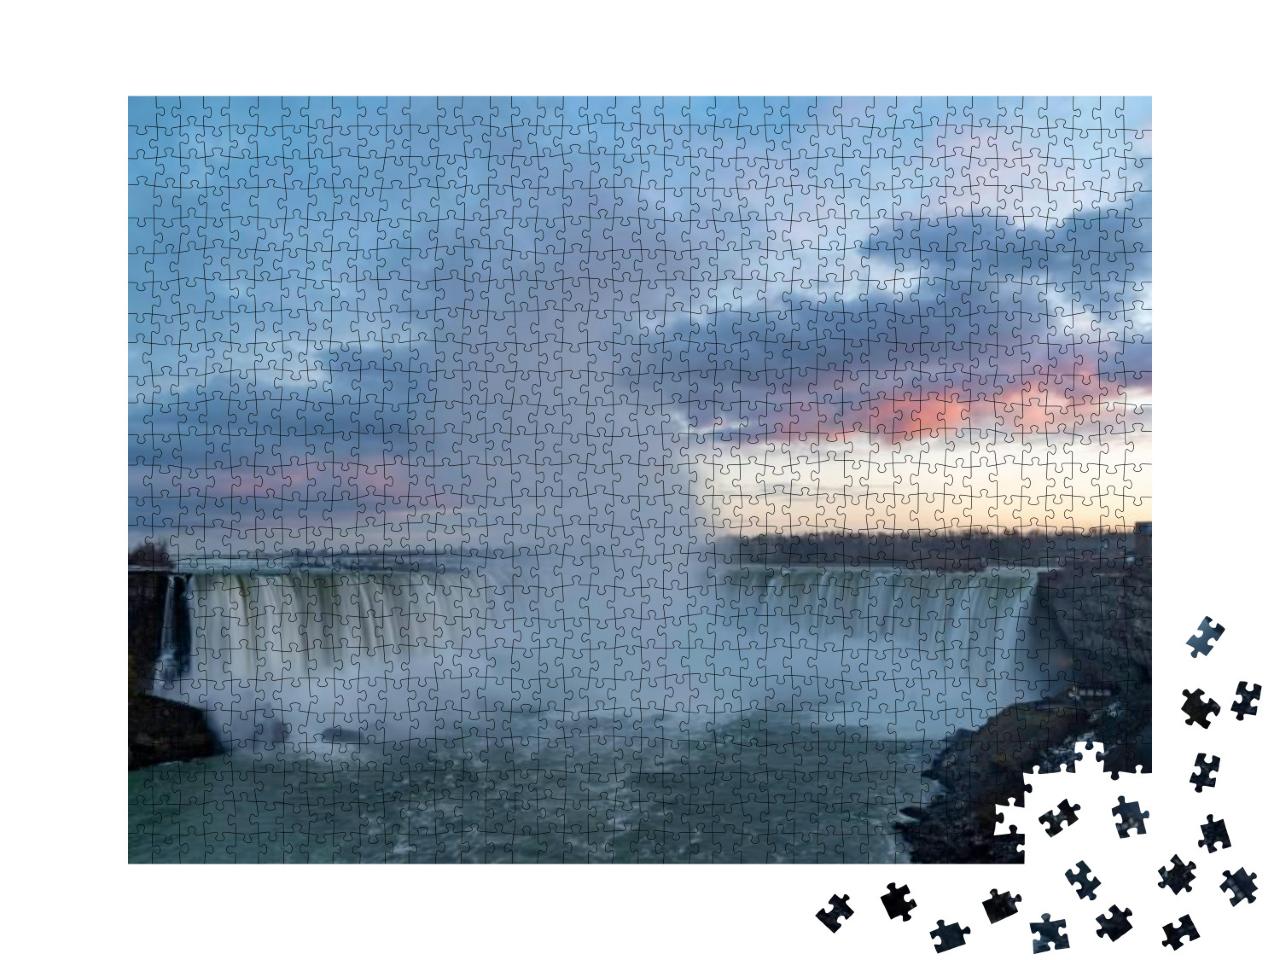 A Long Exposure Photograph of Niagara Falls, Ontario with... Jigsaw Puzzle with 1000 pieces